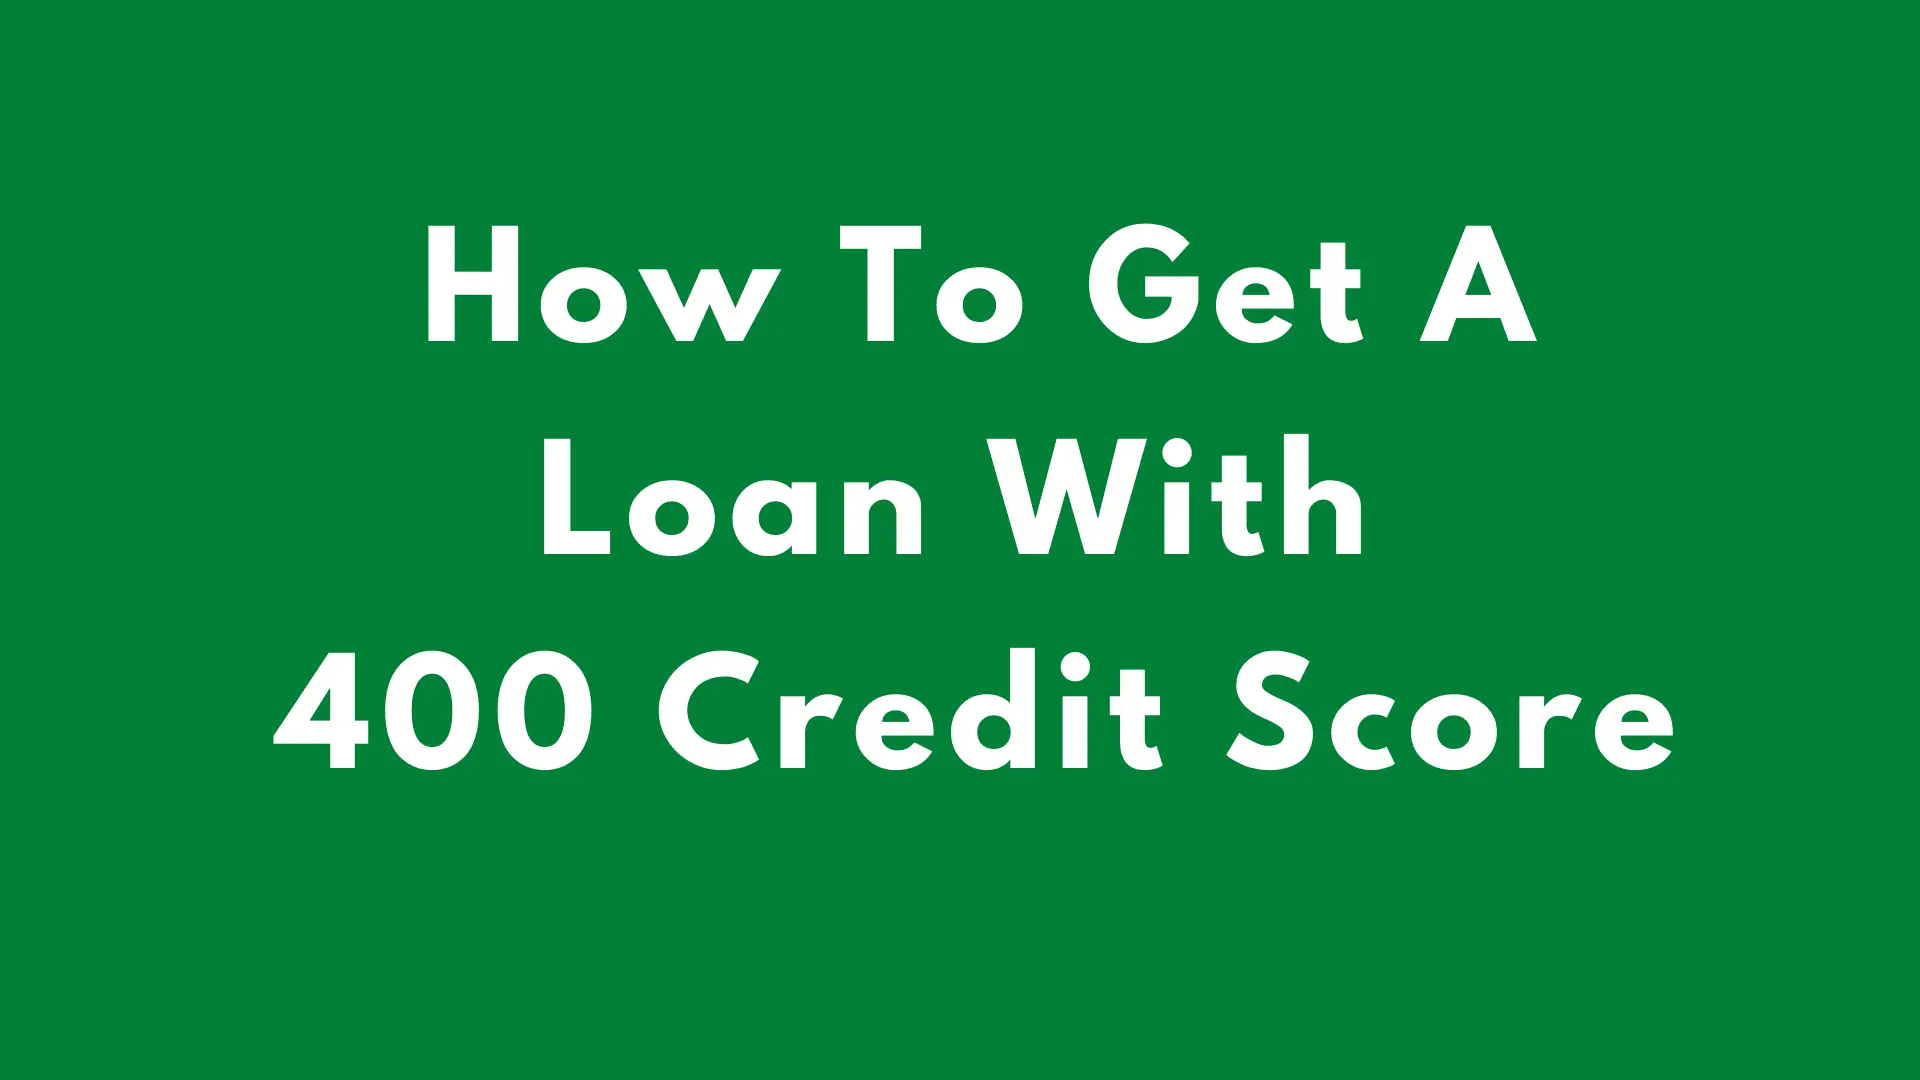 How To Get A Loan With 400 Credit Score